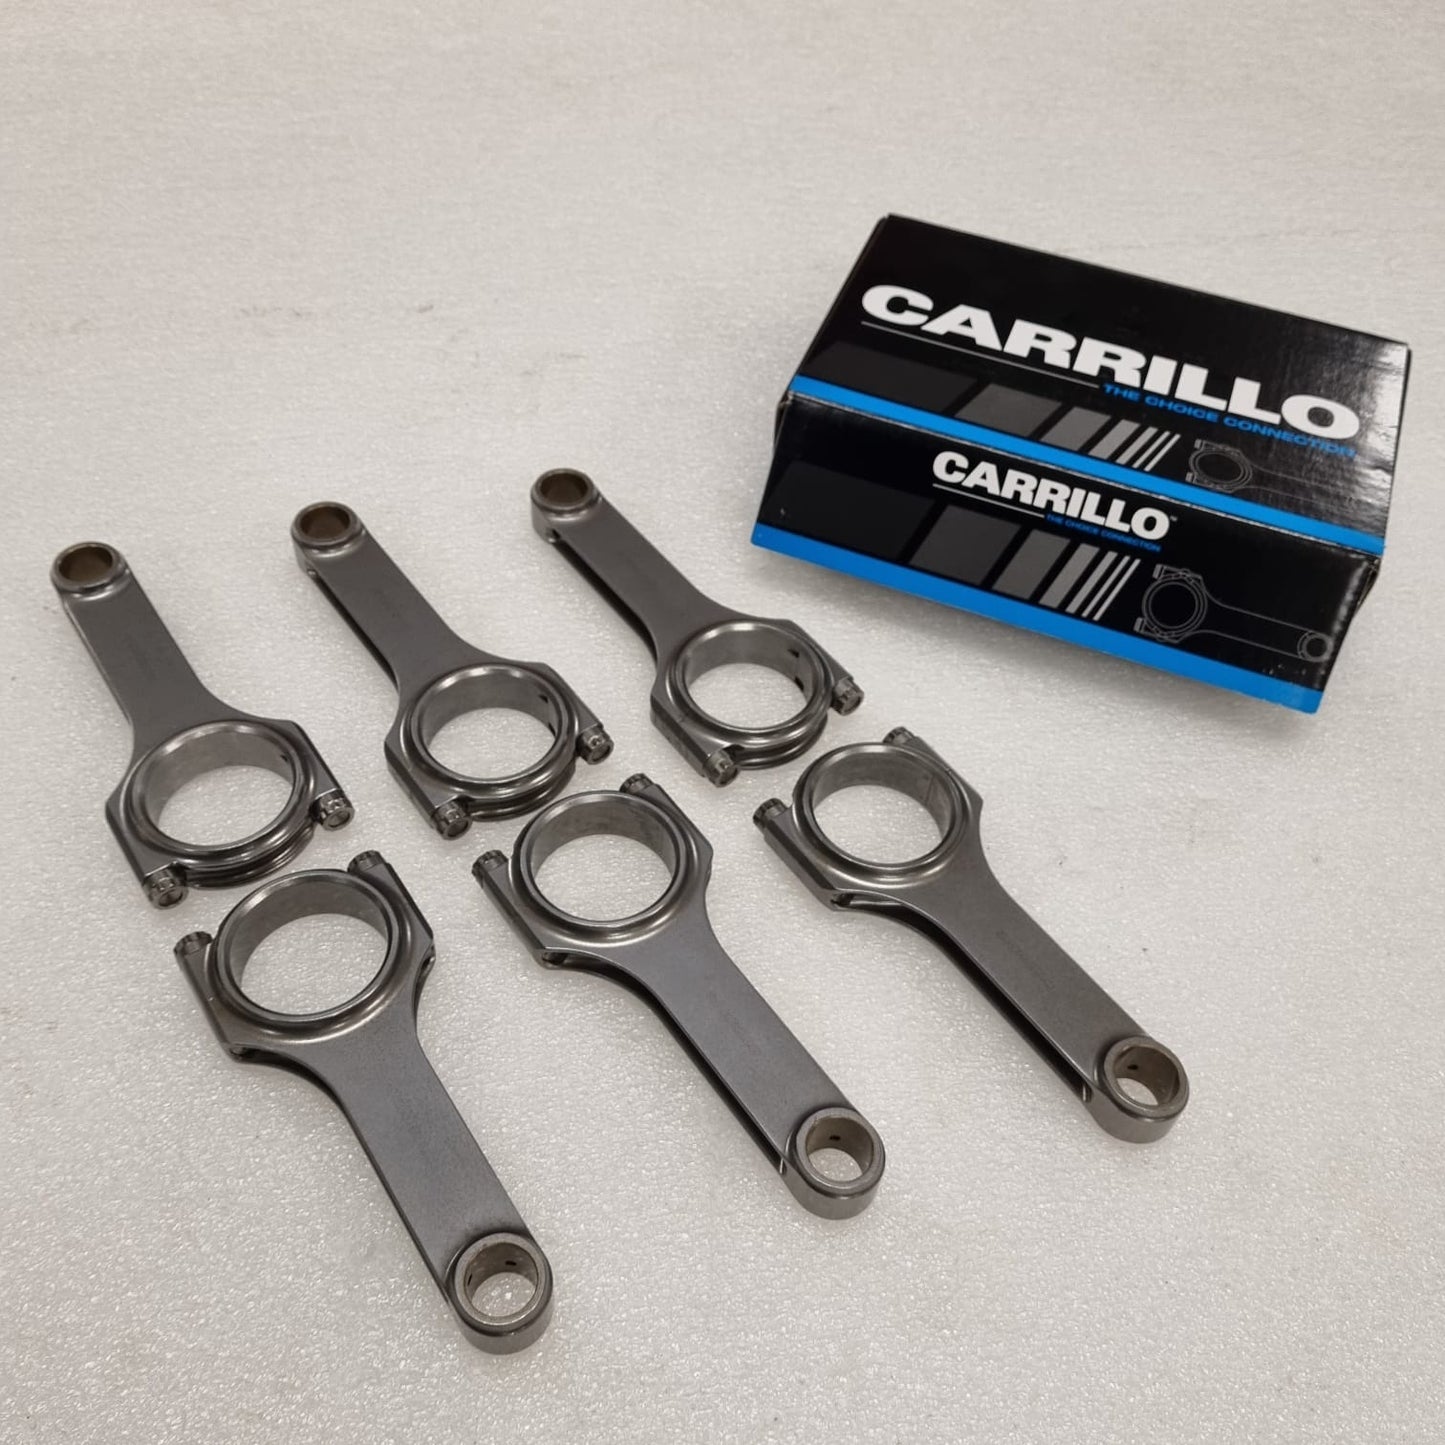 Carrillo Connecting Rods Set 2JZ 2JZ-GTE Toyota Supra MK4 TO-2JZ>-65590S- USED OPEN BOX